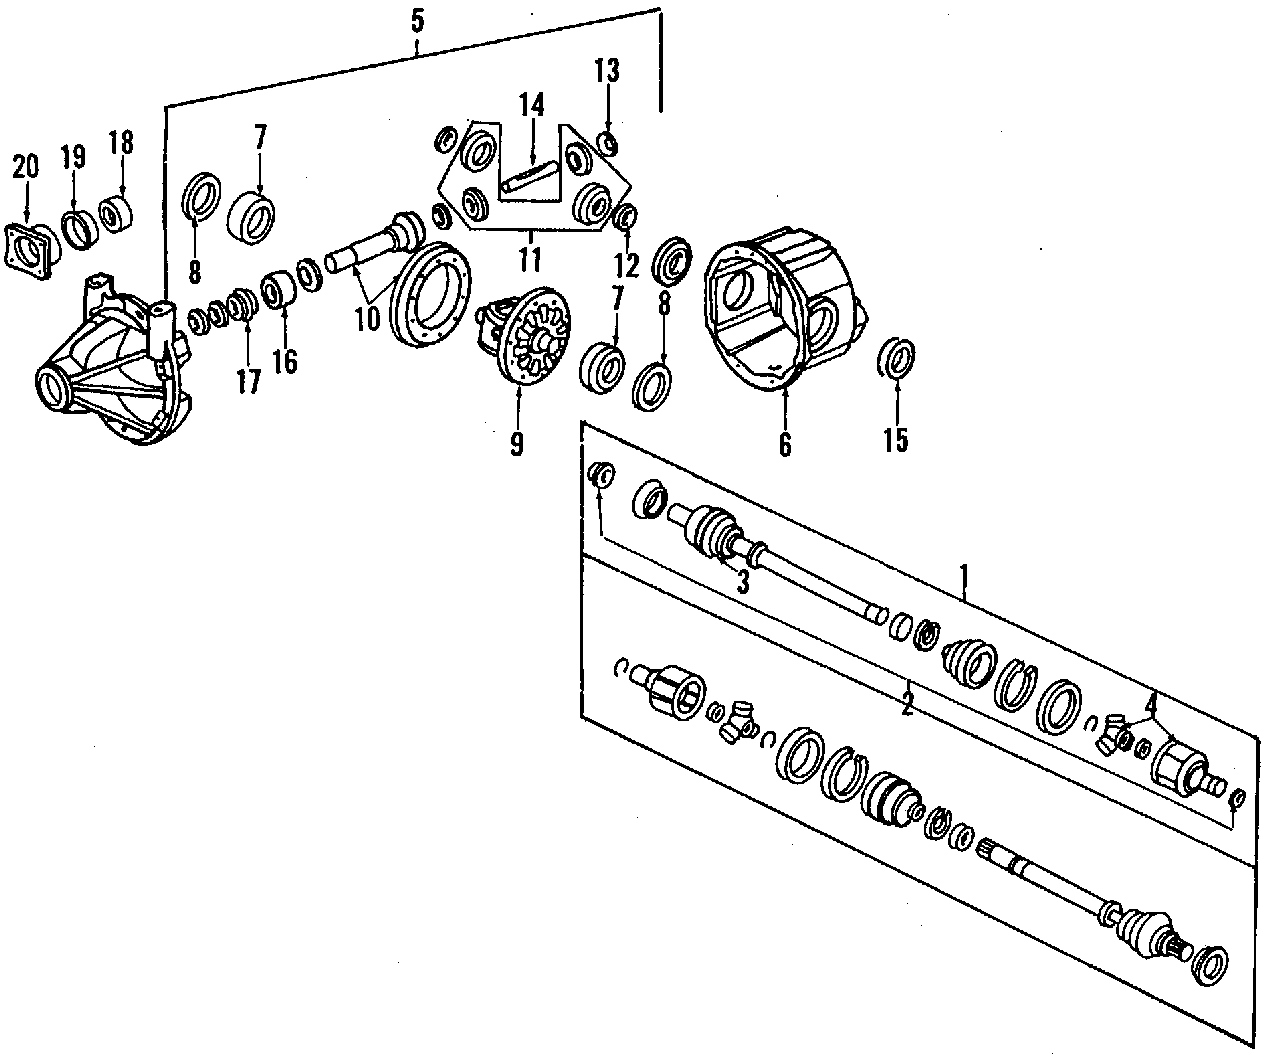 18REAR AXLE. AXLE SHAFTS & JOINTS. DIFFERENTIAL. PROPELLER SHAFT.https://images.simplepart.com/images/parts/motor/fullsize/F640360.png